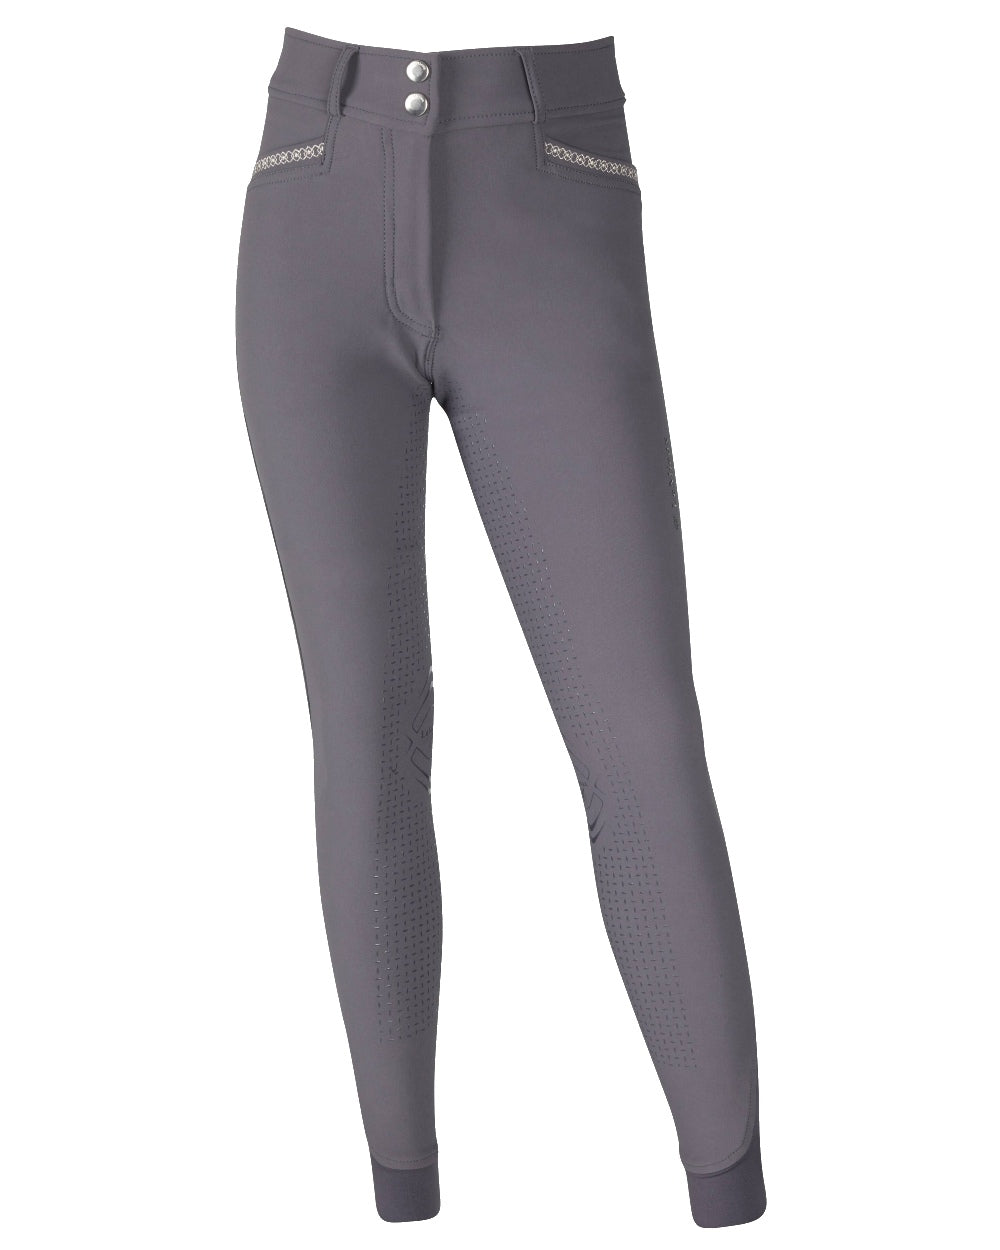 Grey coloured LeMieux Young Rider St Tropez Breech on white background 